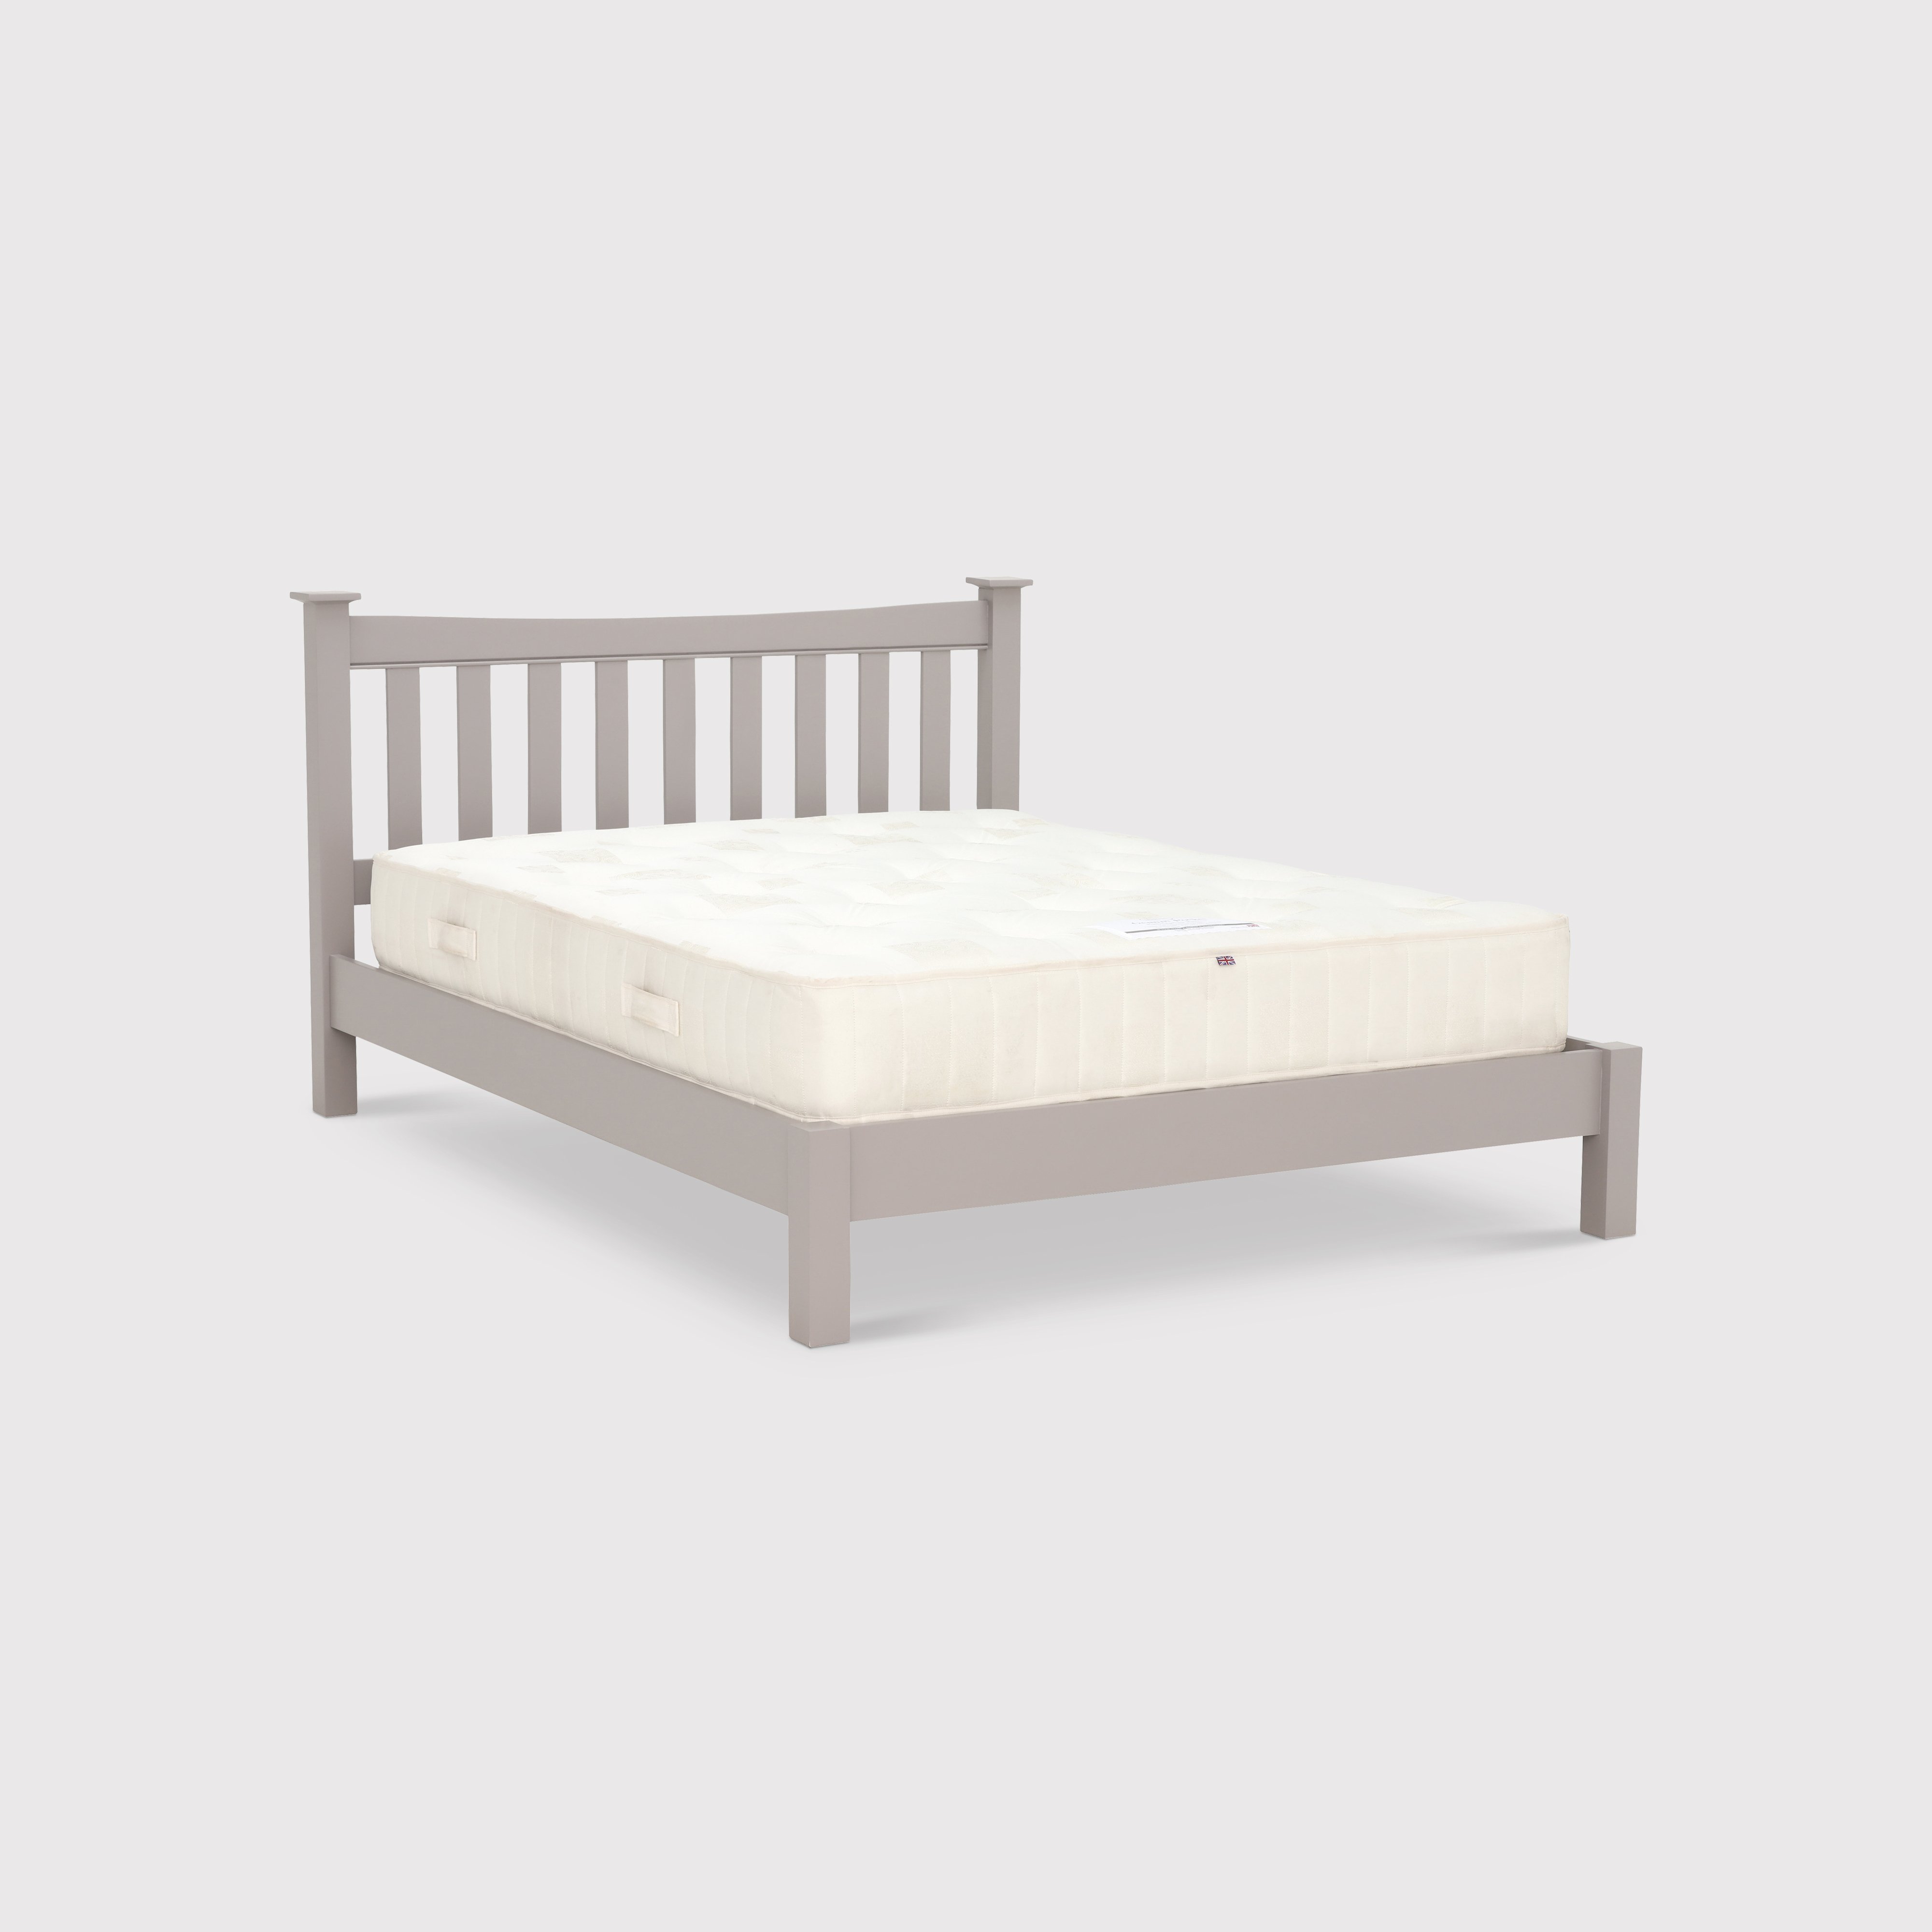 Helmsley 135cm Bed Frame, Grey | Double | Barker & Stonehouse